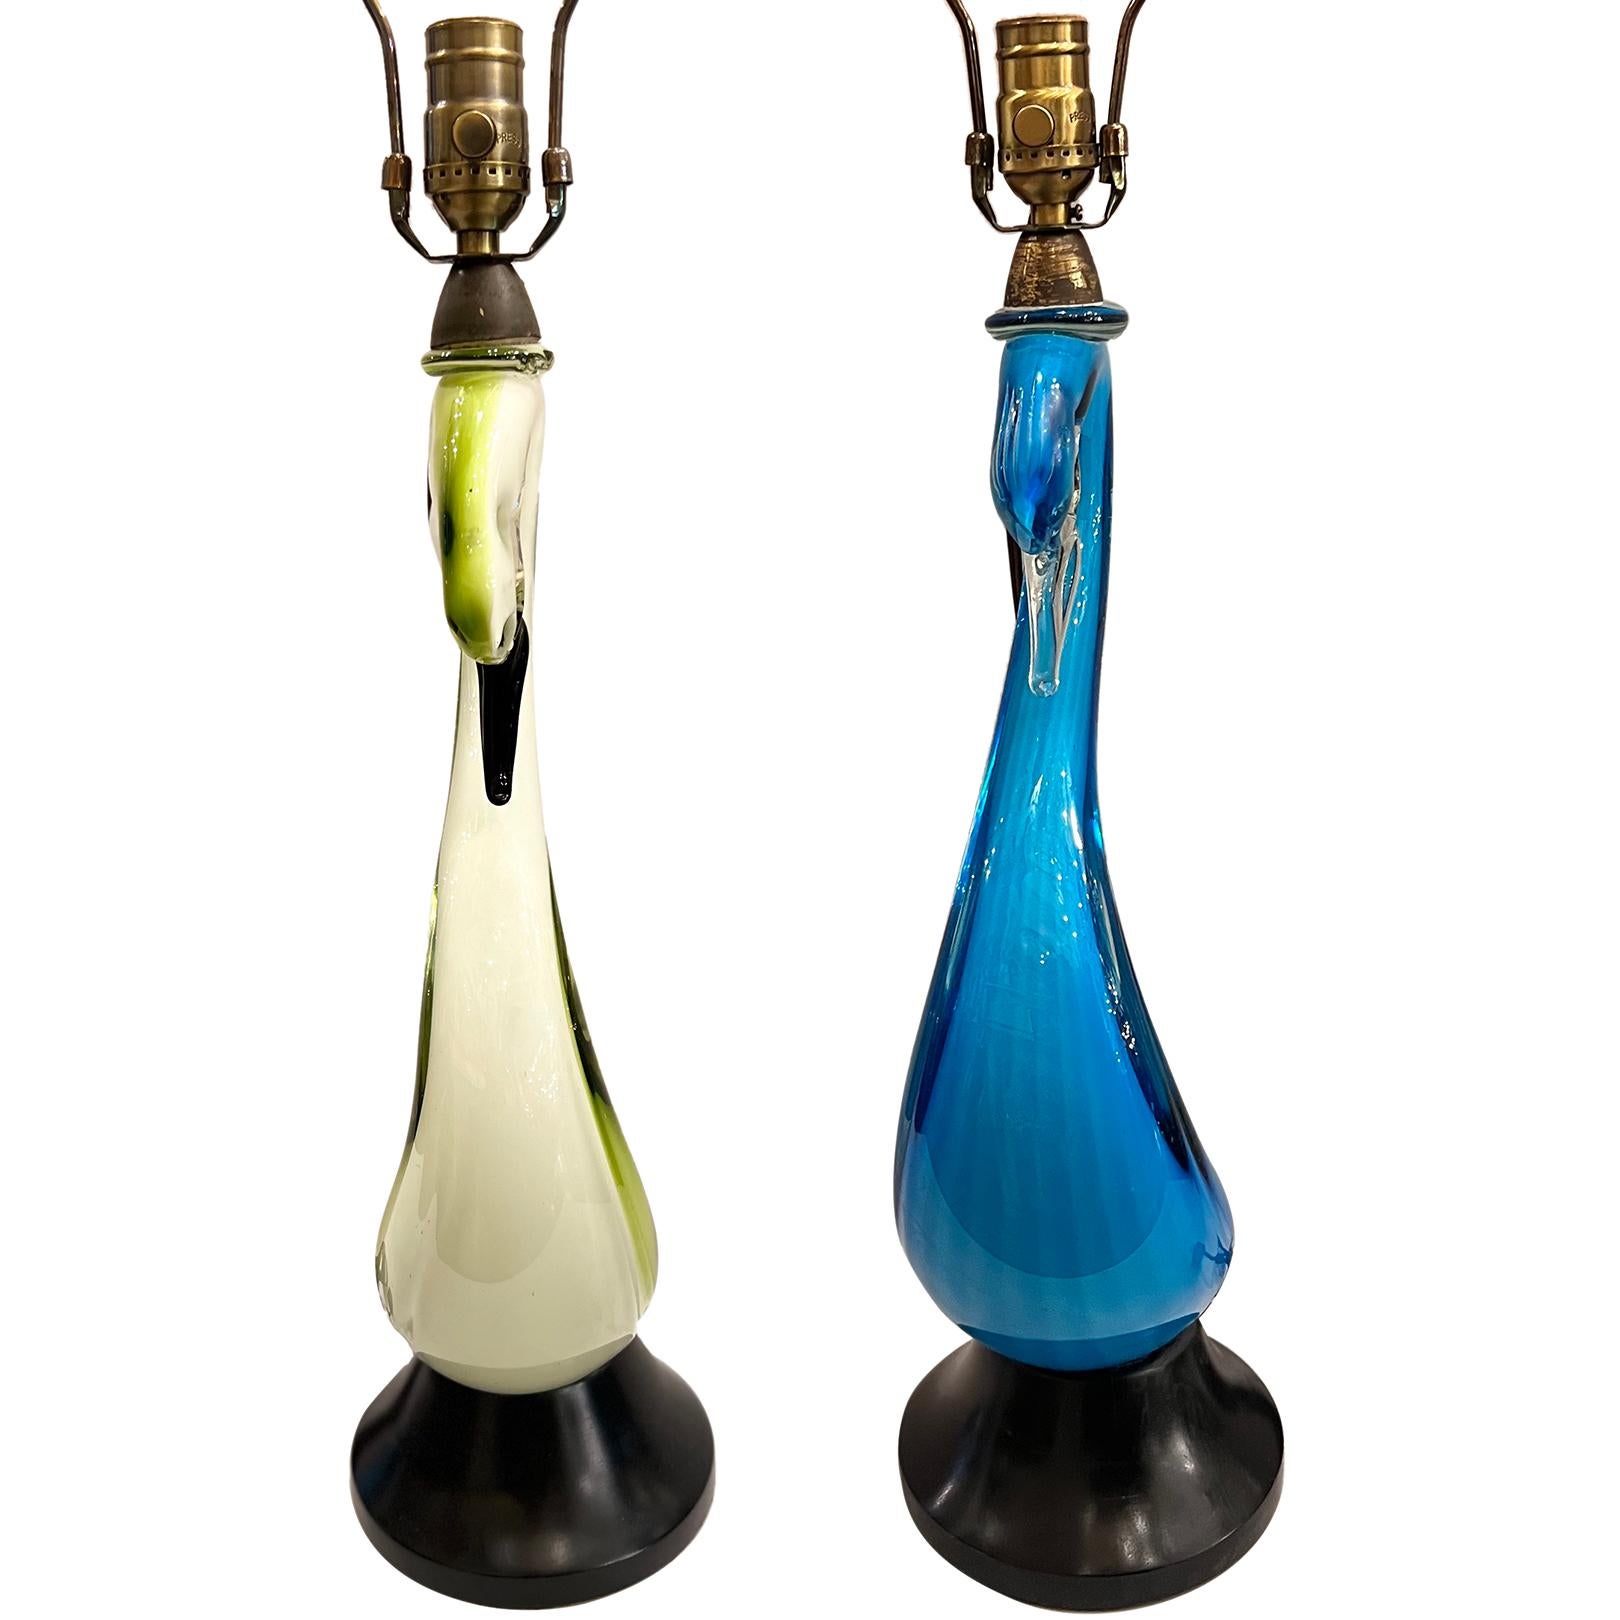 Circa 1960's matching pair Murano Swan Shaped lamps with wood bases.

Measurements:
Height of body: 18.5